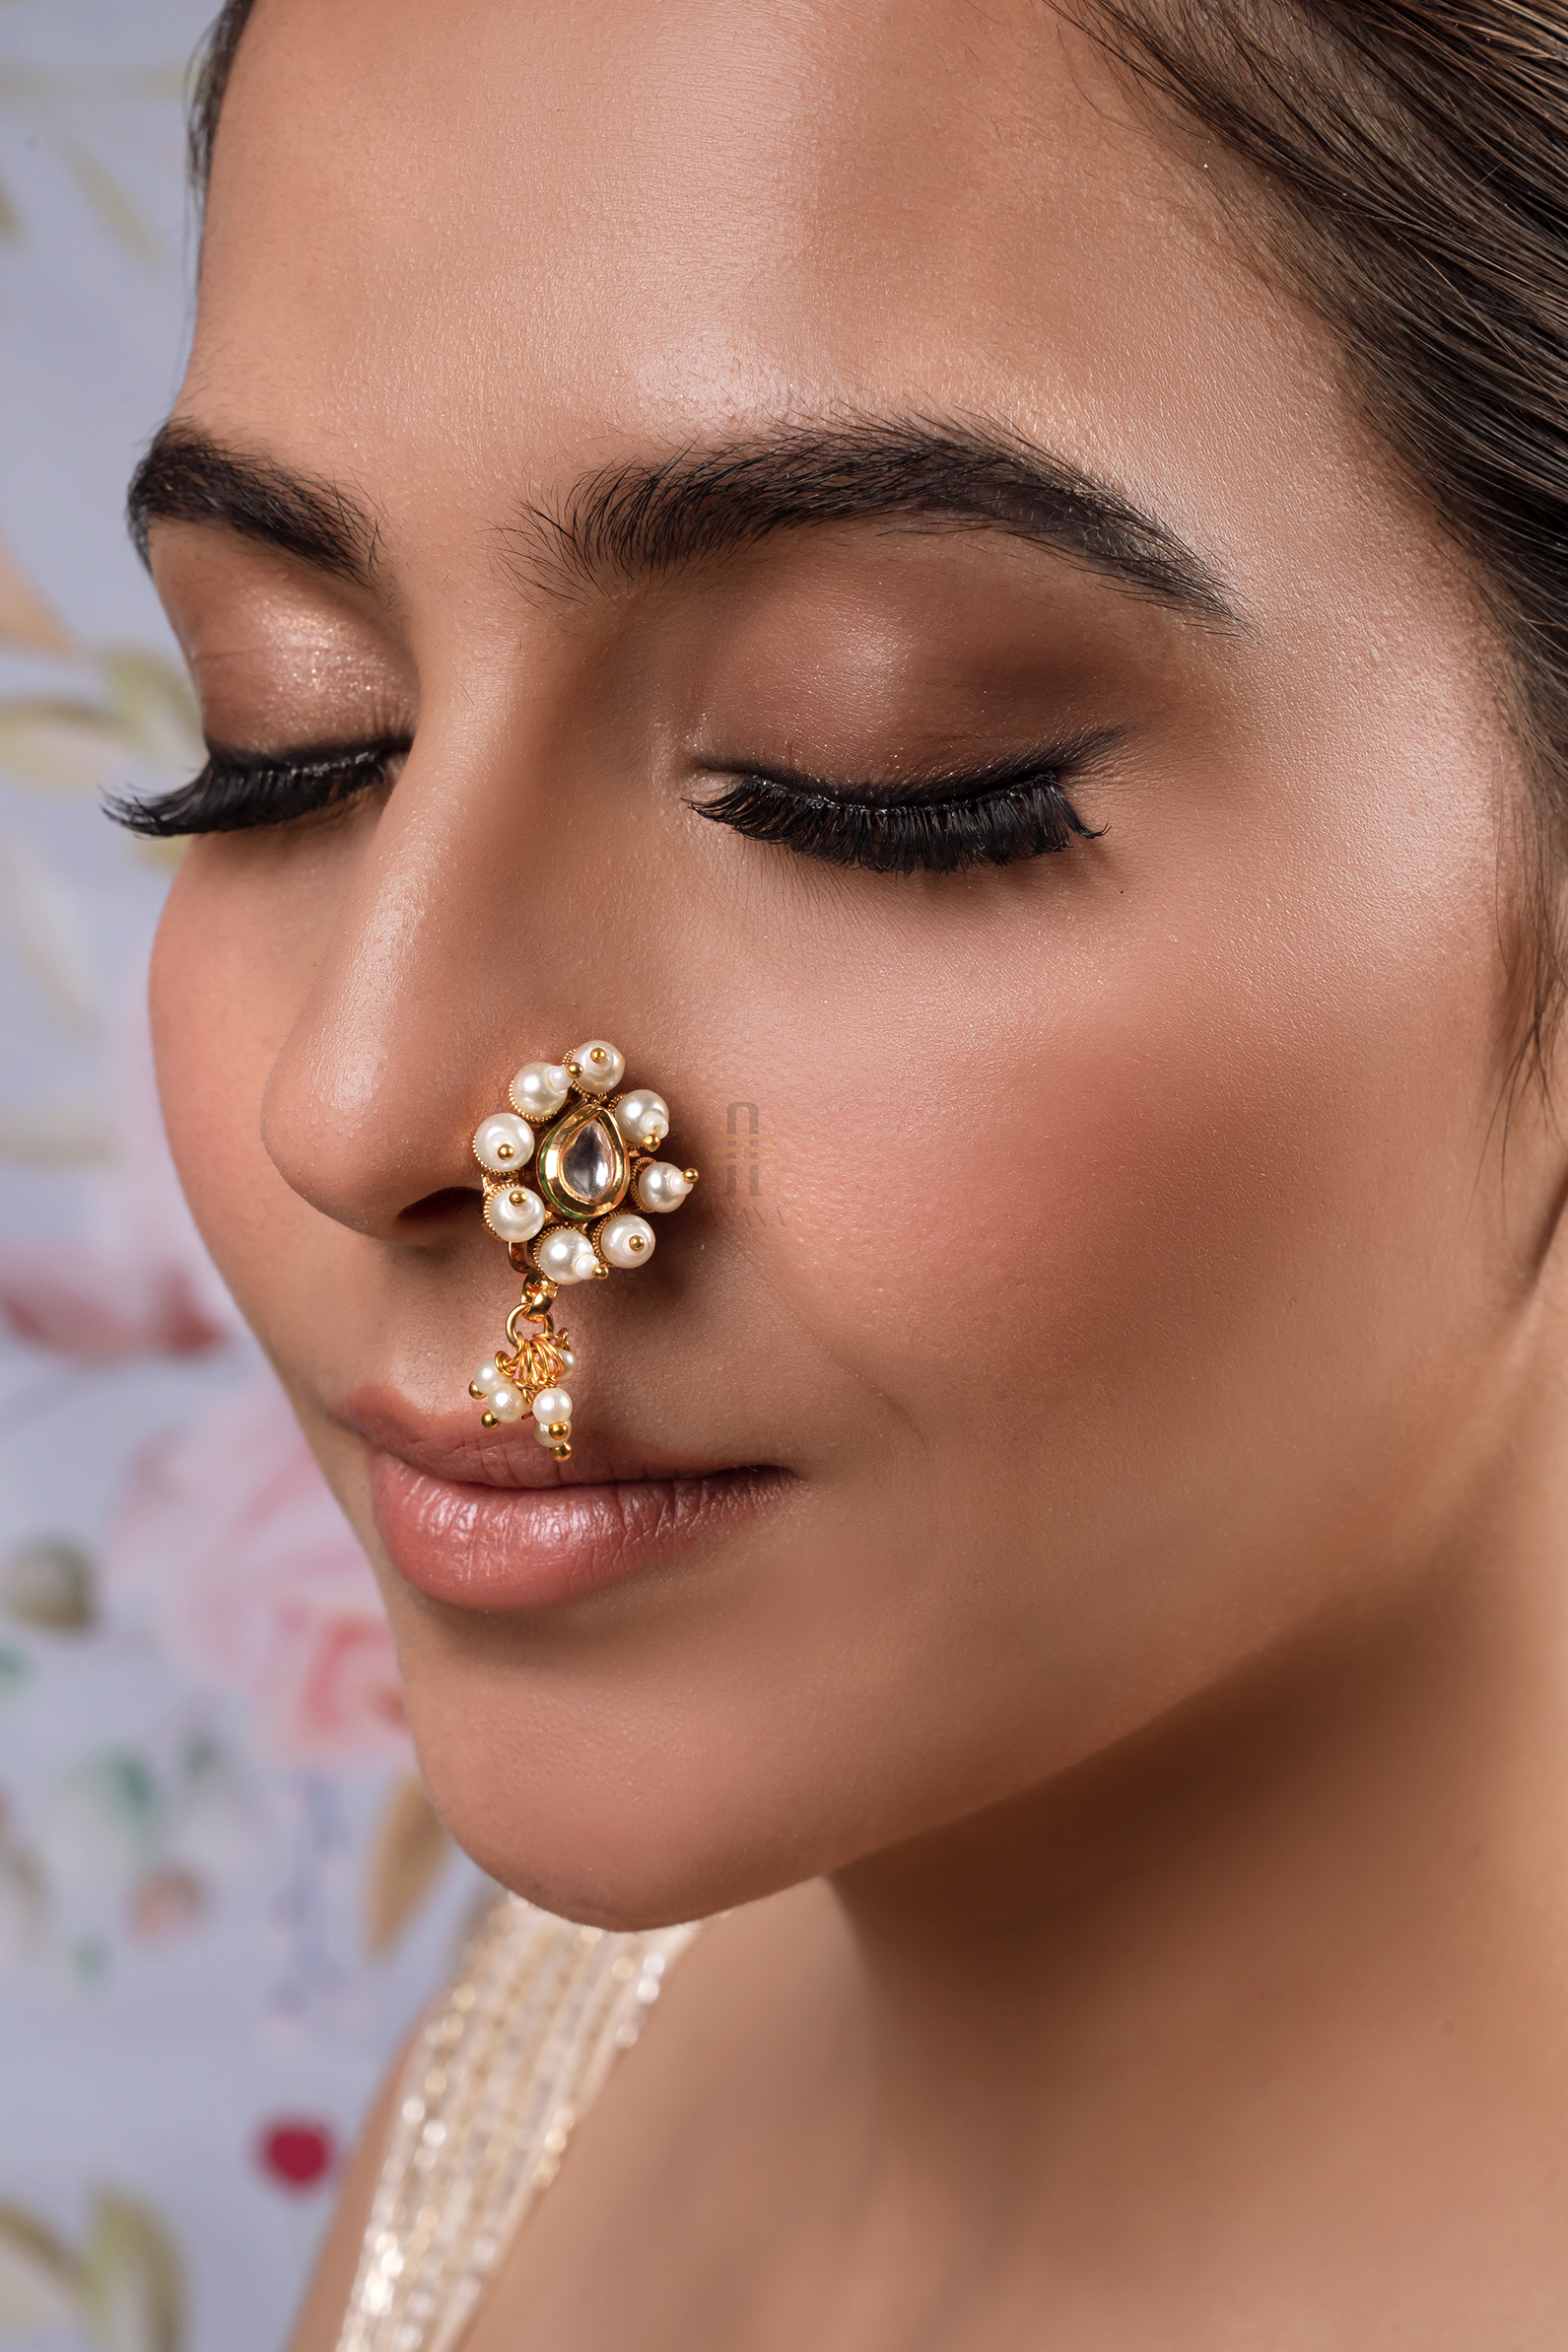 Amazon.com: Abhika Creations Kundan Decorated Nath With Golden Pearly Hair  Chain Handmade Designer Bollywood Style Indian Nose Ring Nath Bali :  Handmade Products